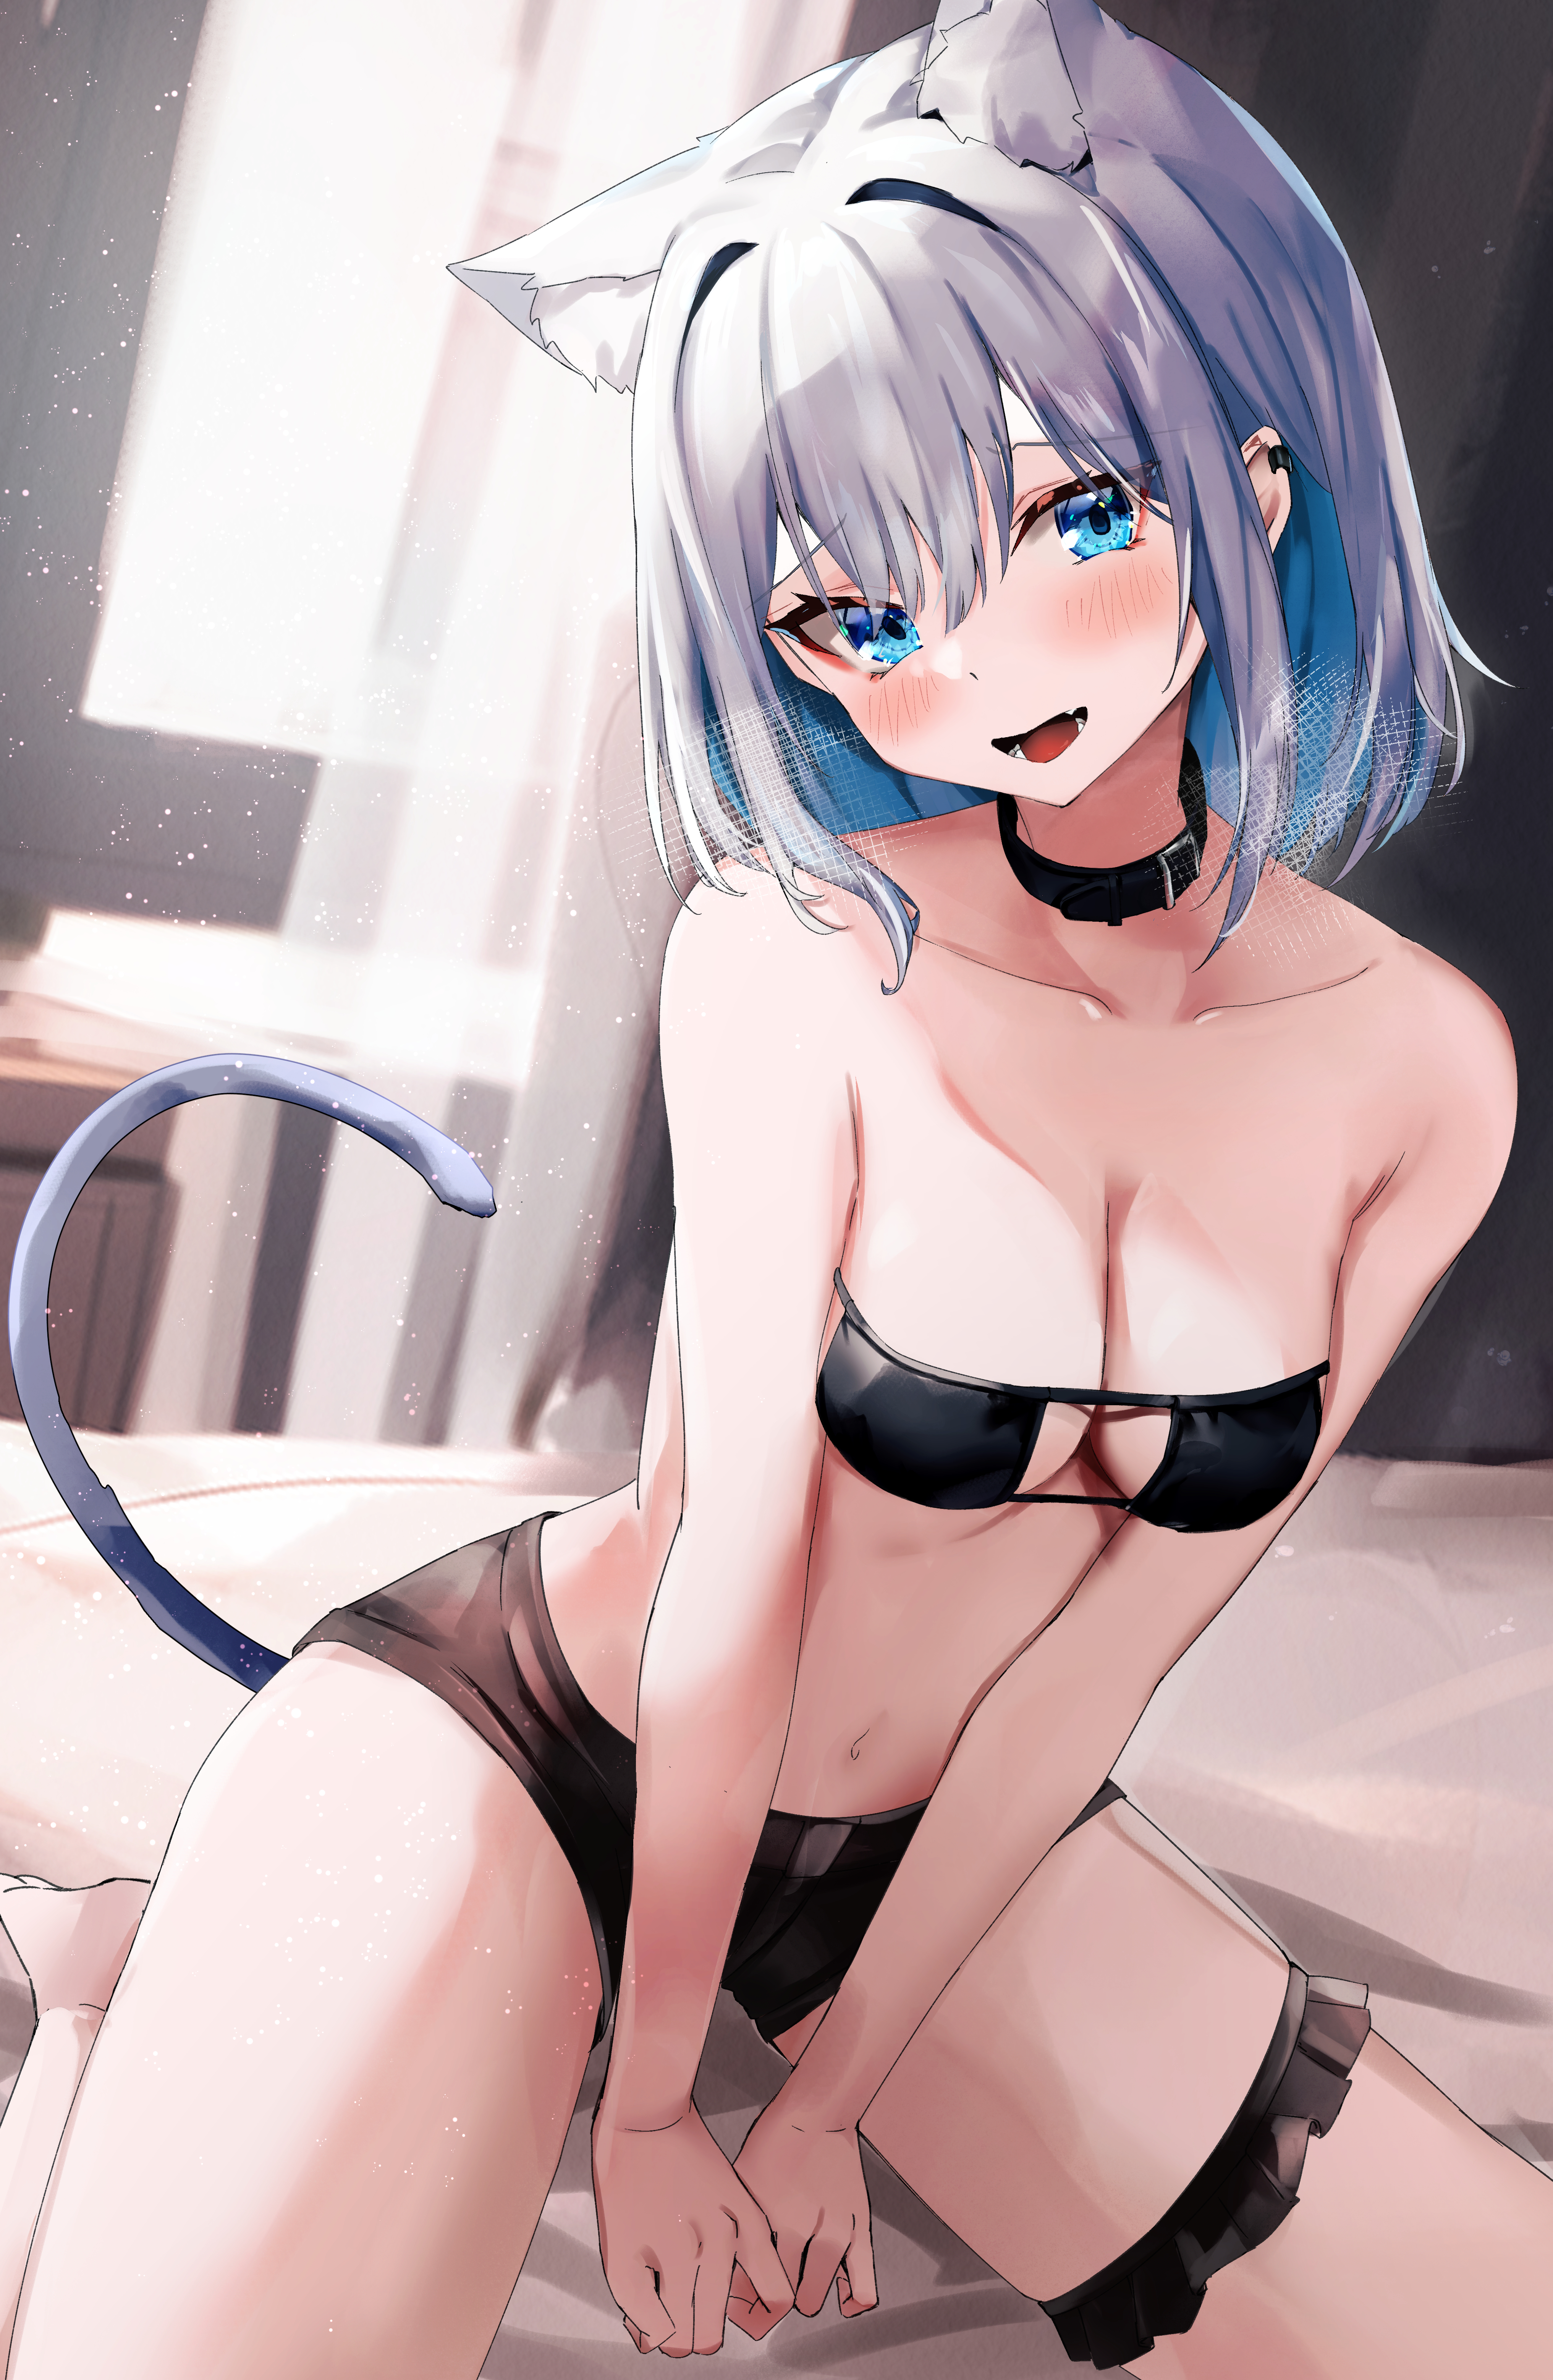 Cat Lingerie Anime Porn - Ready to cuddle up for a cat nap?